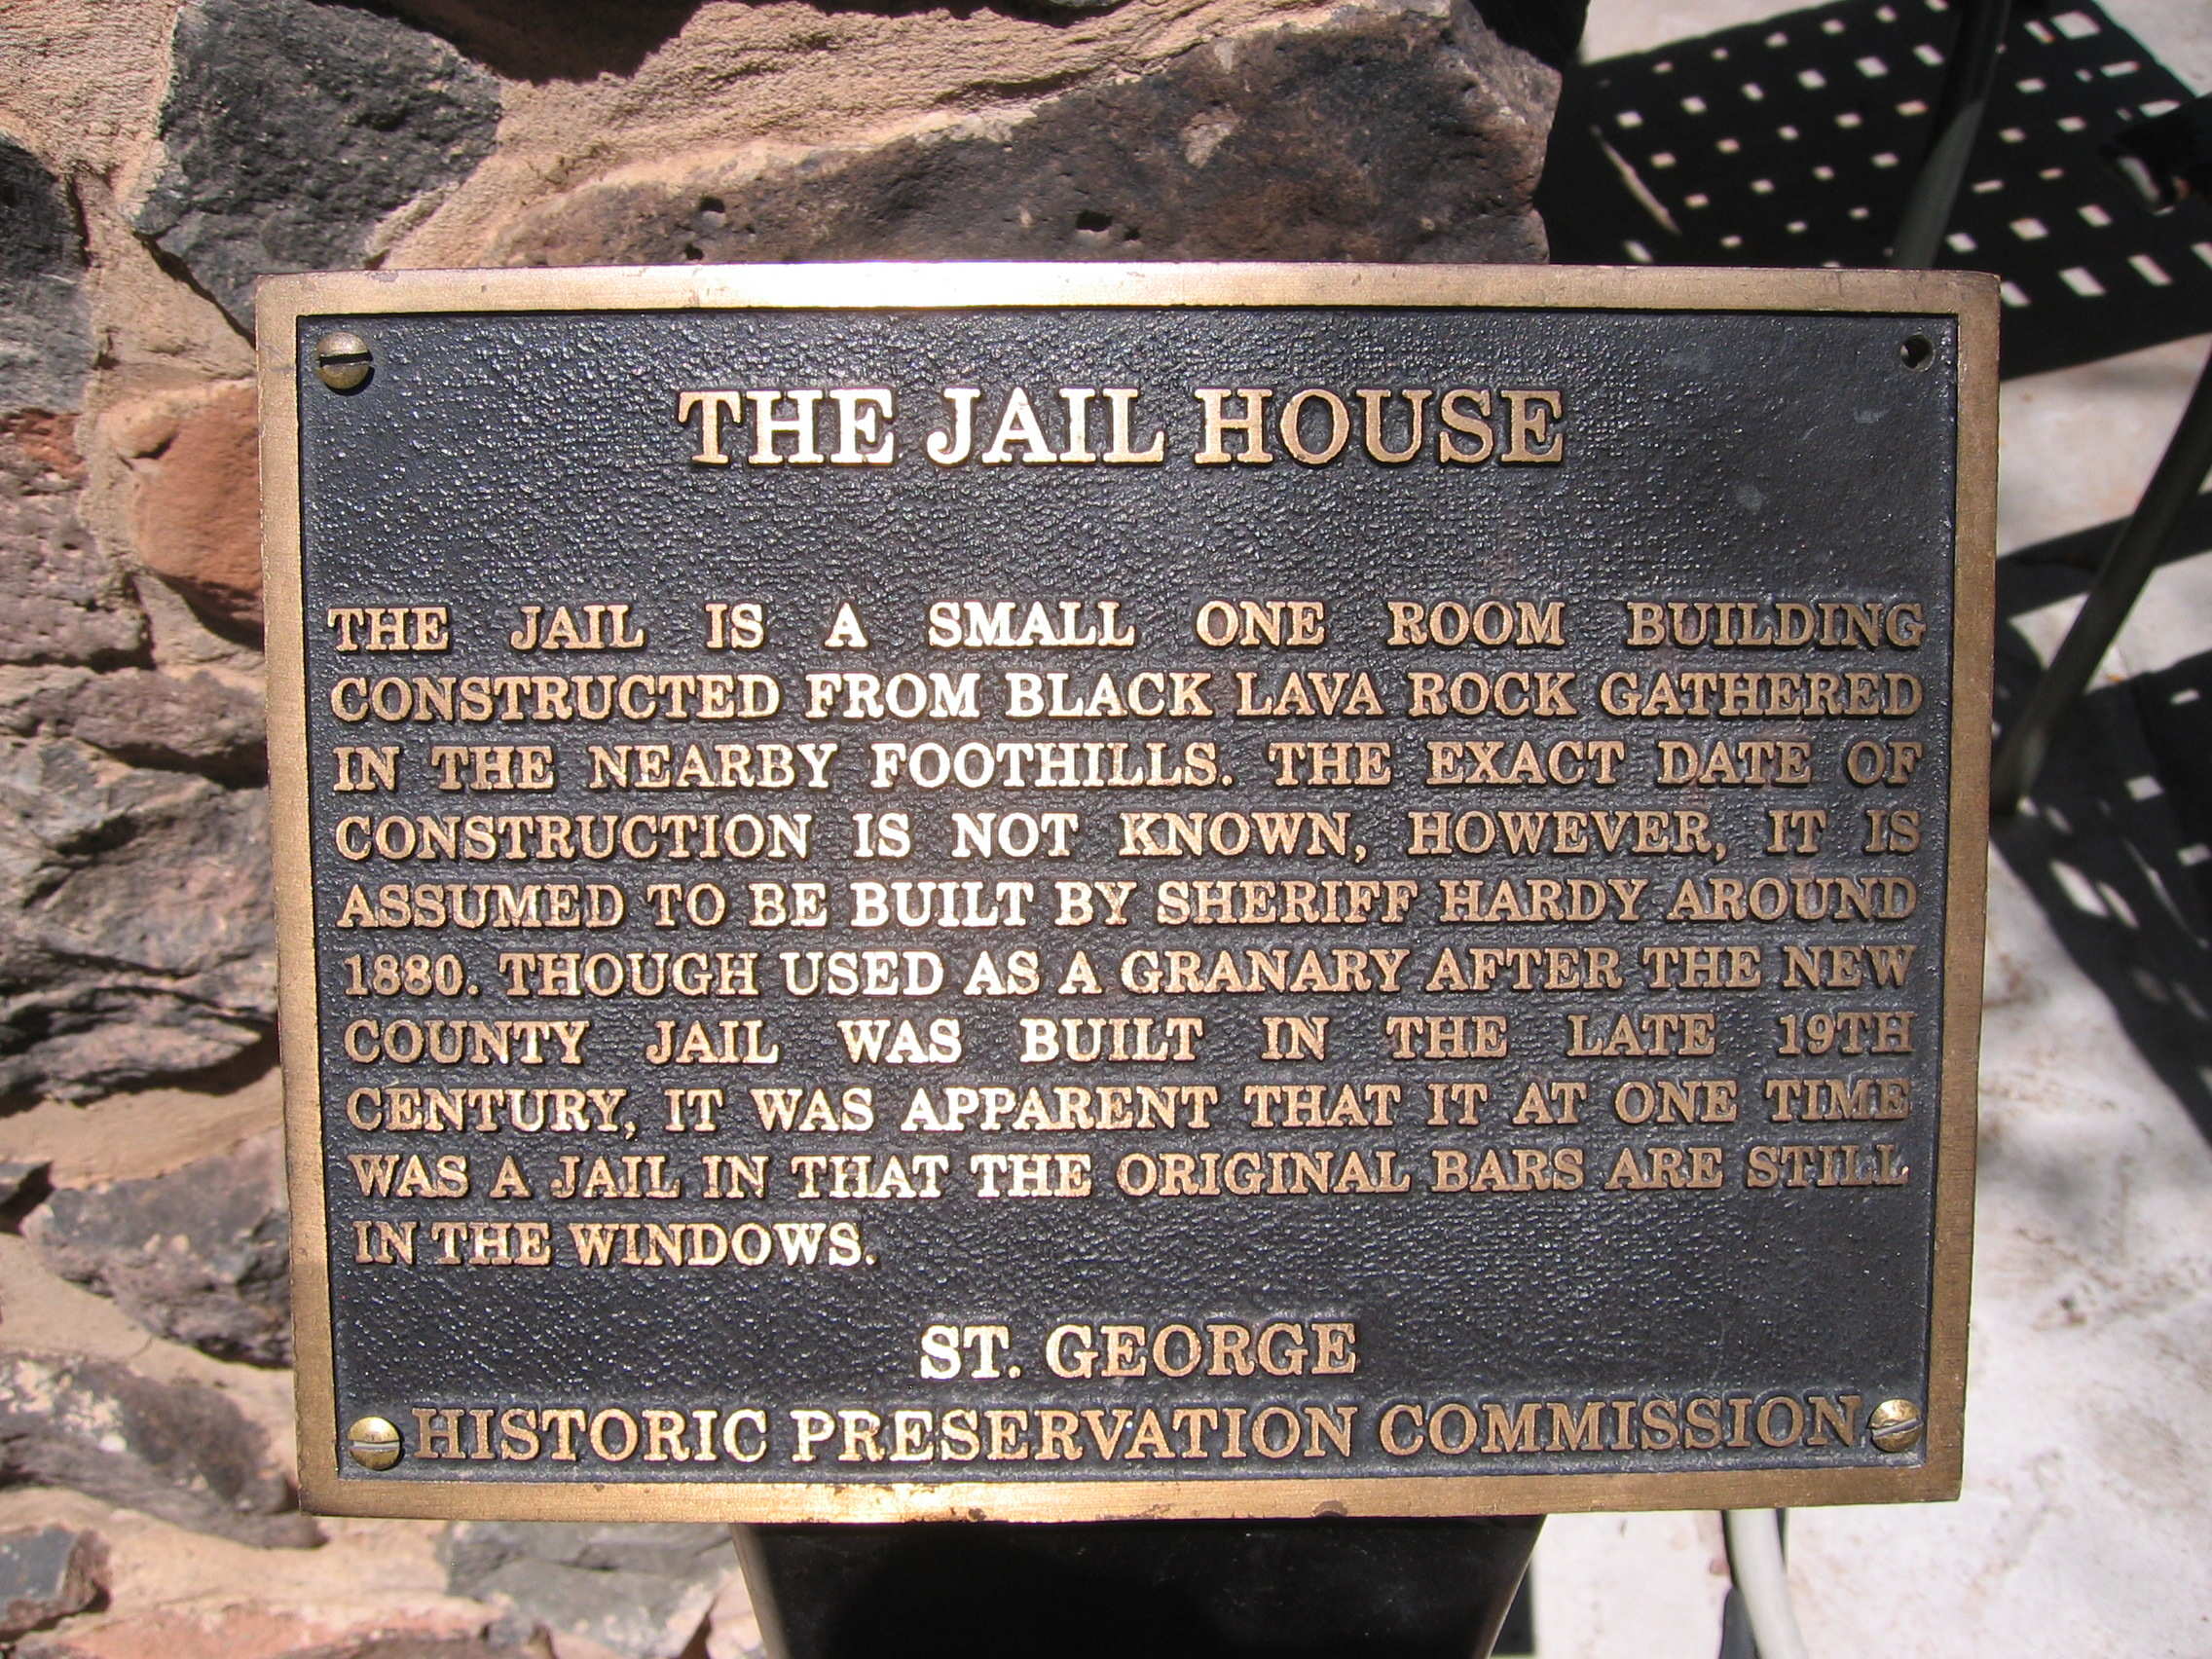 WCHS-00206 Plaque in front of the old Jail House